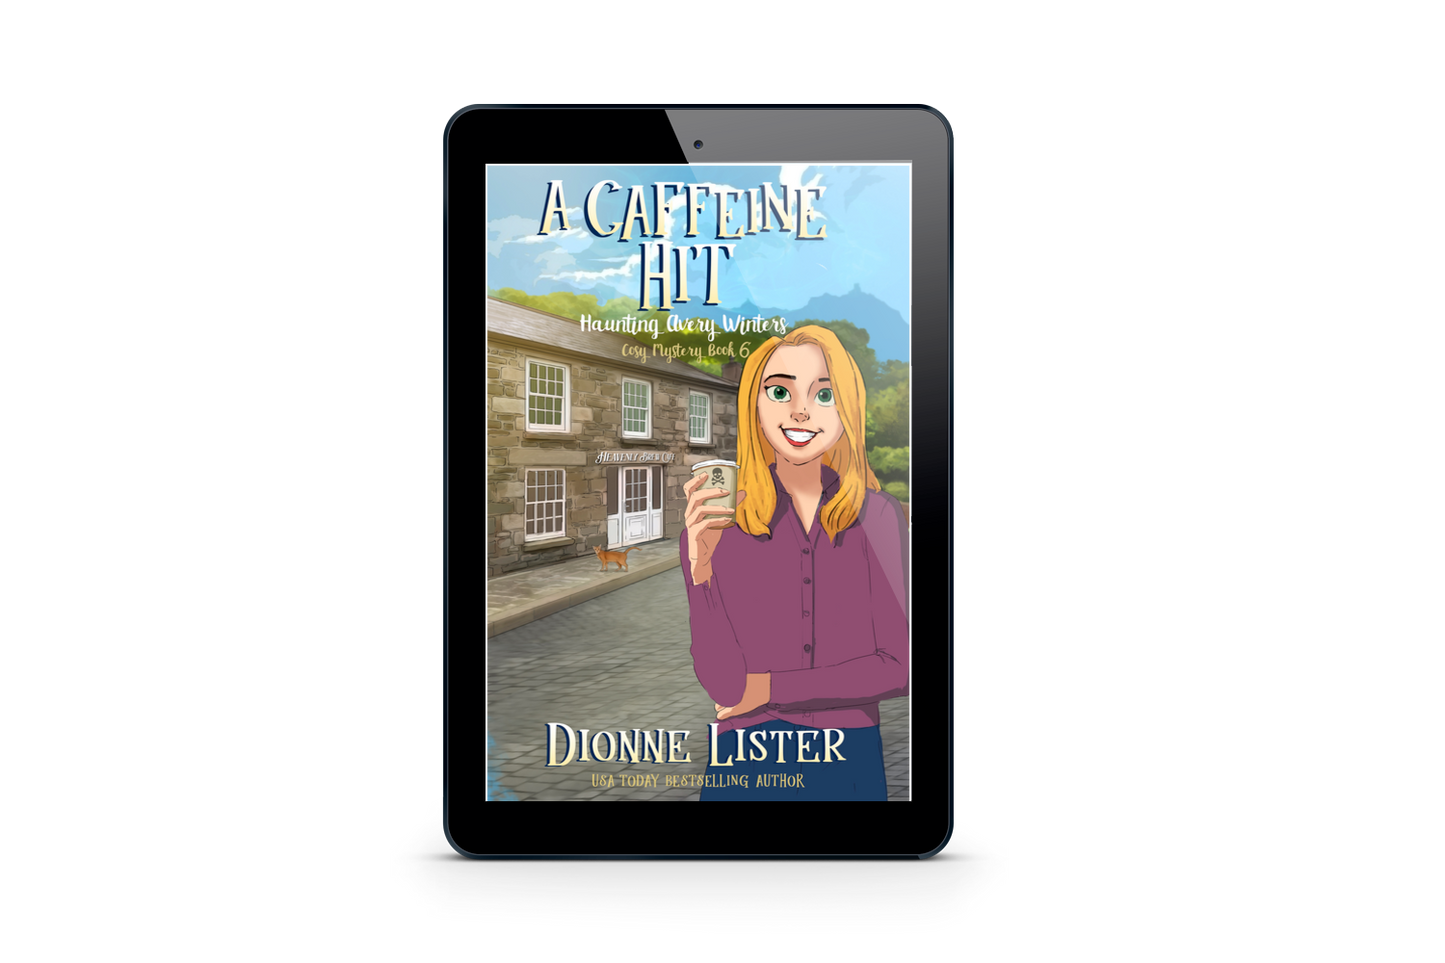 A Caffeine Hit—Haunting Avery Winters Book 6